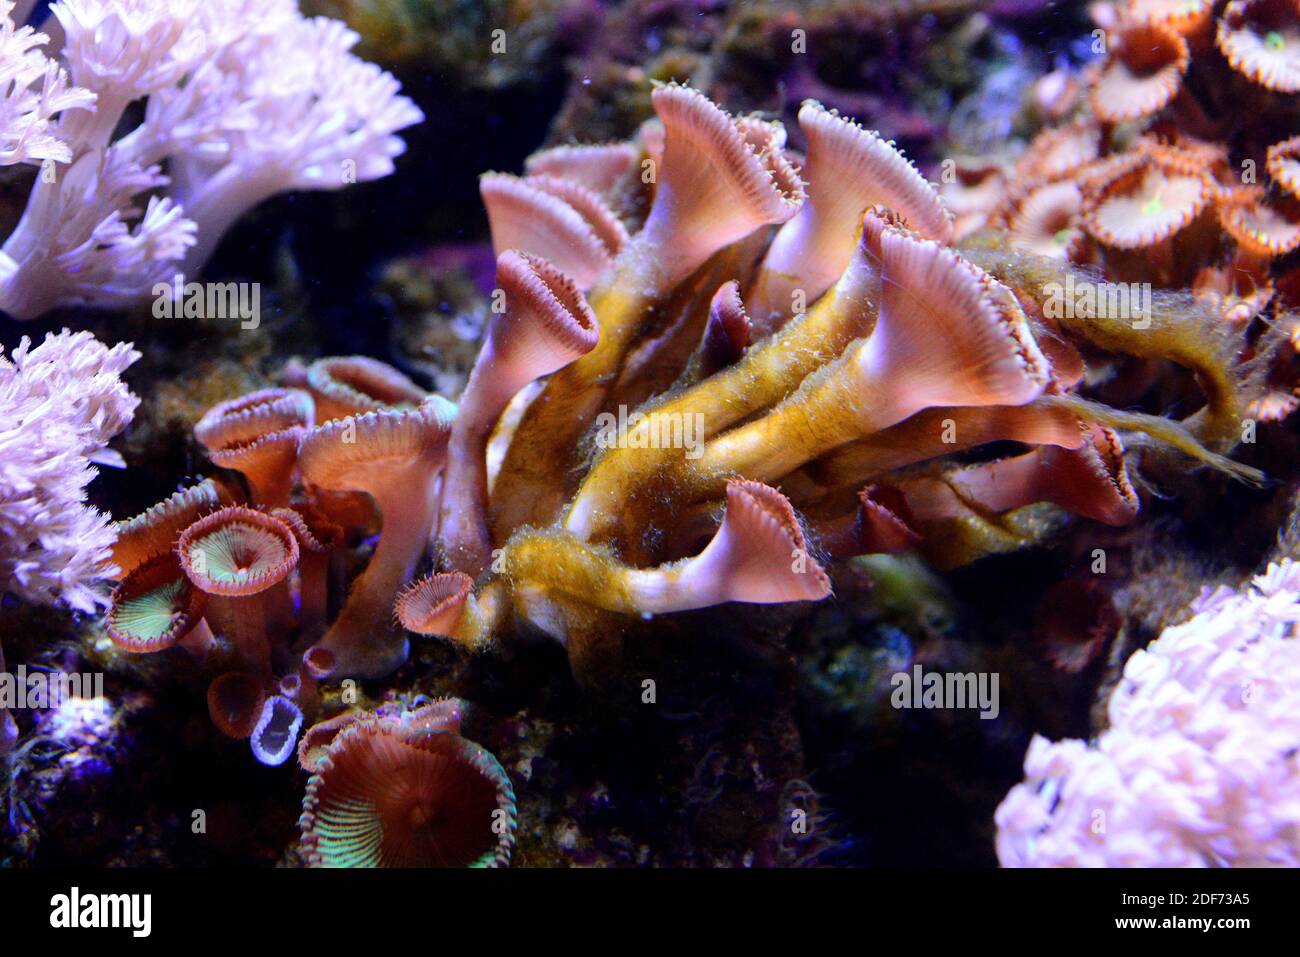 Membranipora High Resolution Stock Photography and Images - Alamy